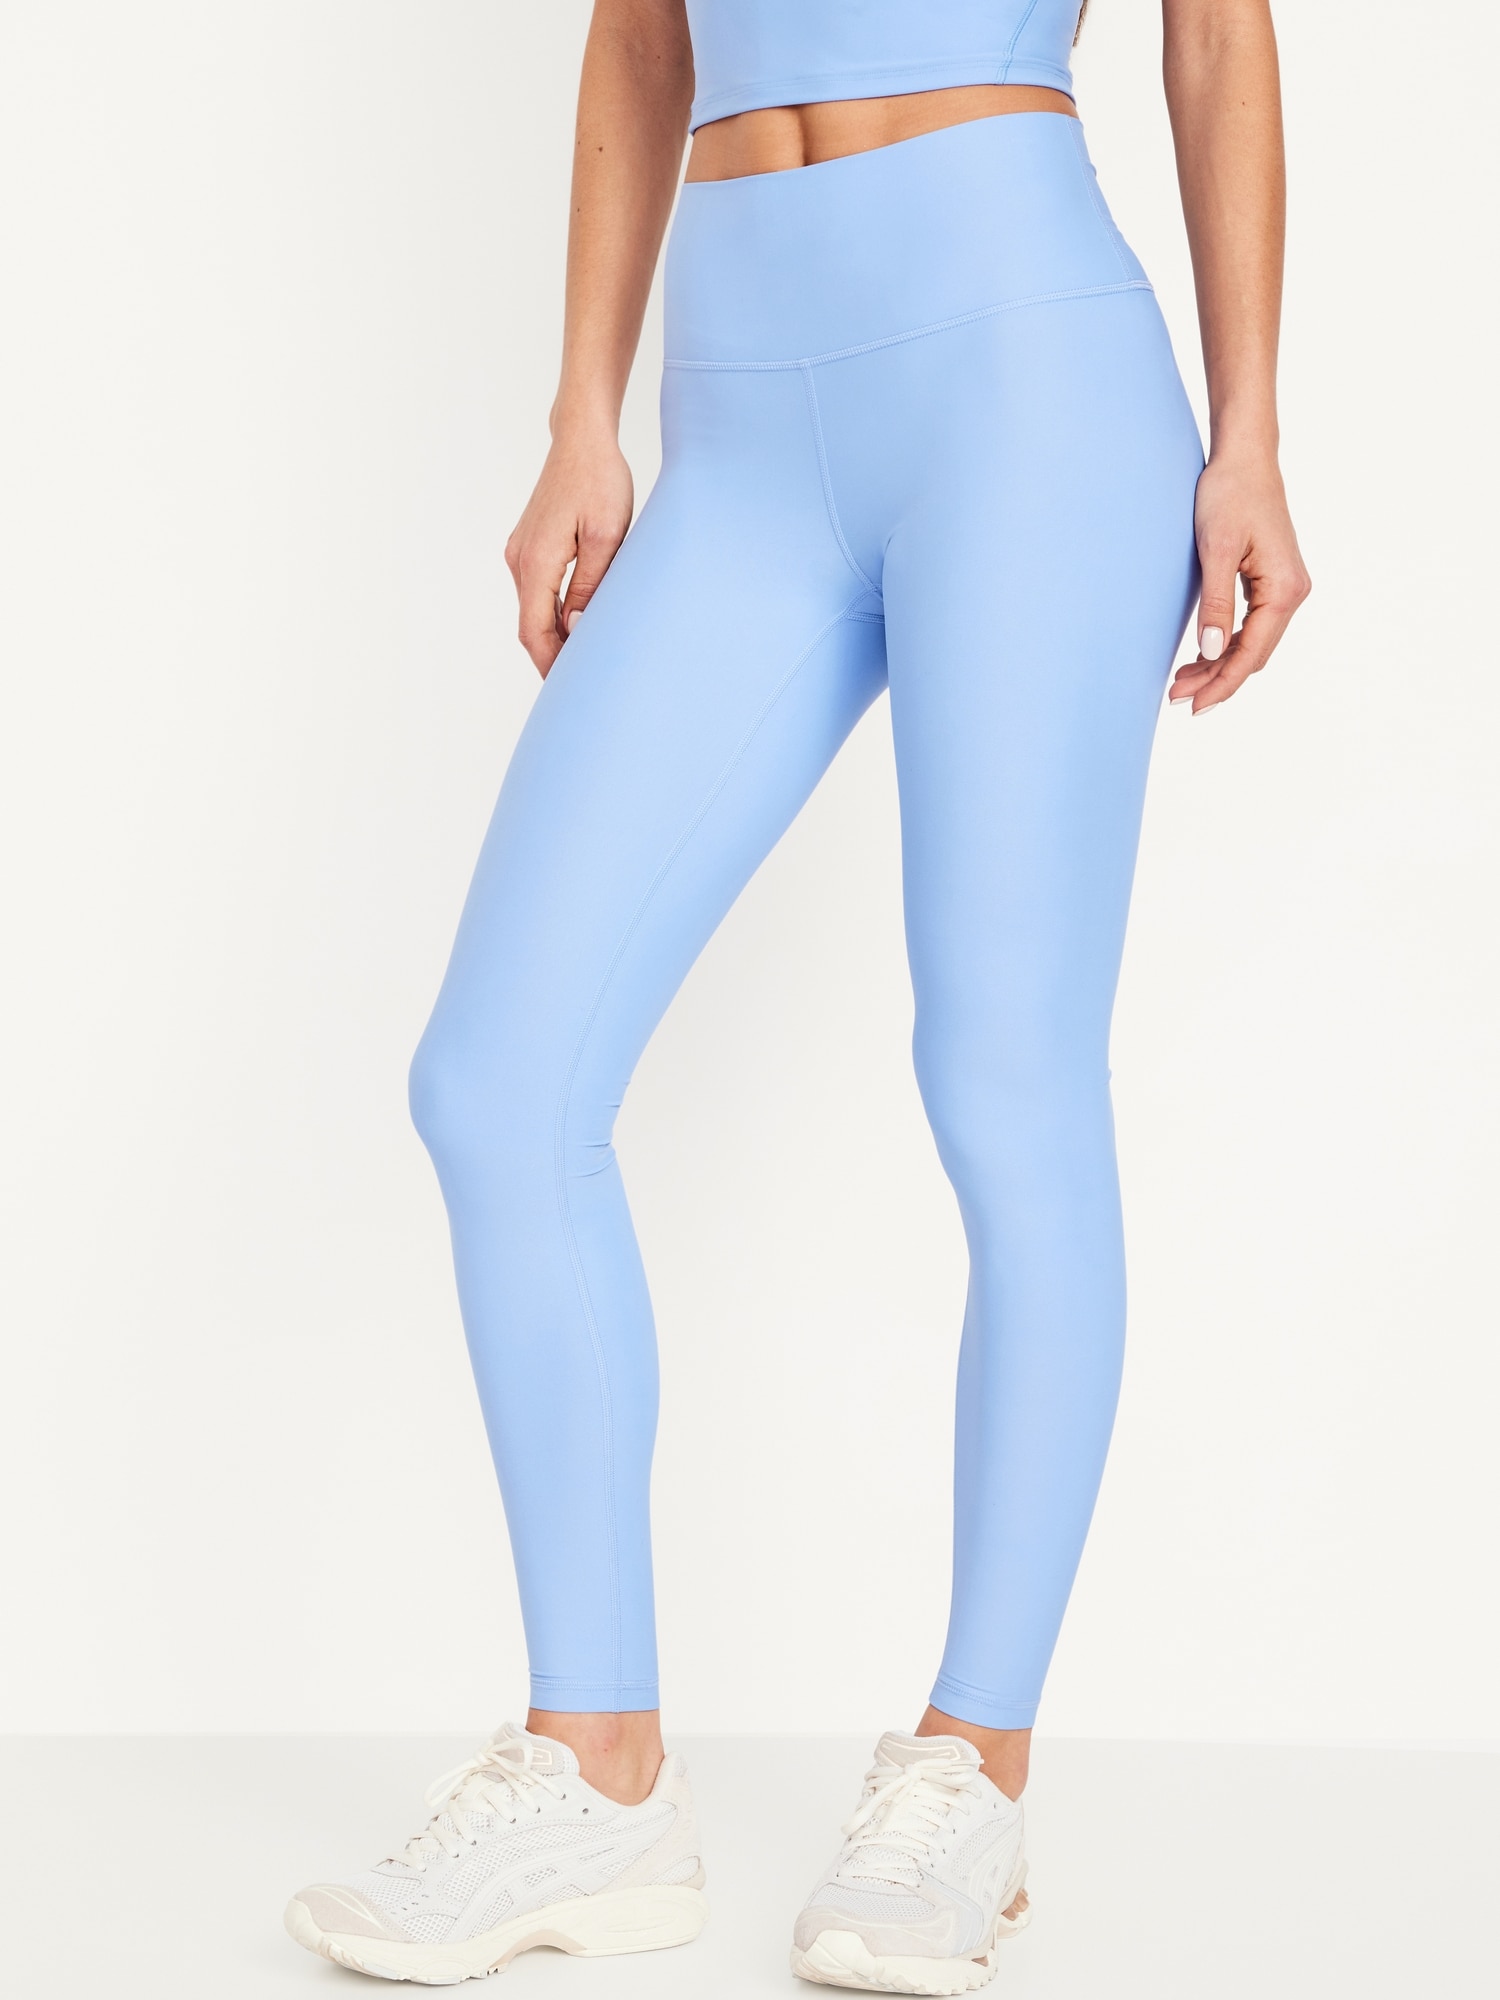 Old Navy High-Waisted PowerSoft Crop Leggings for Women